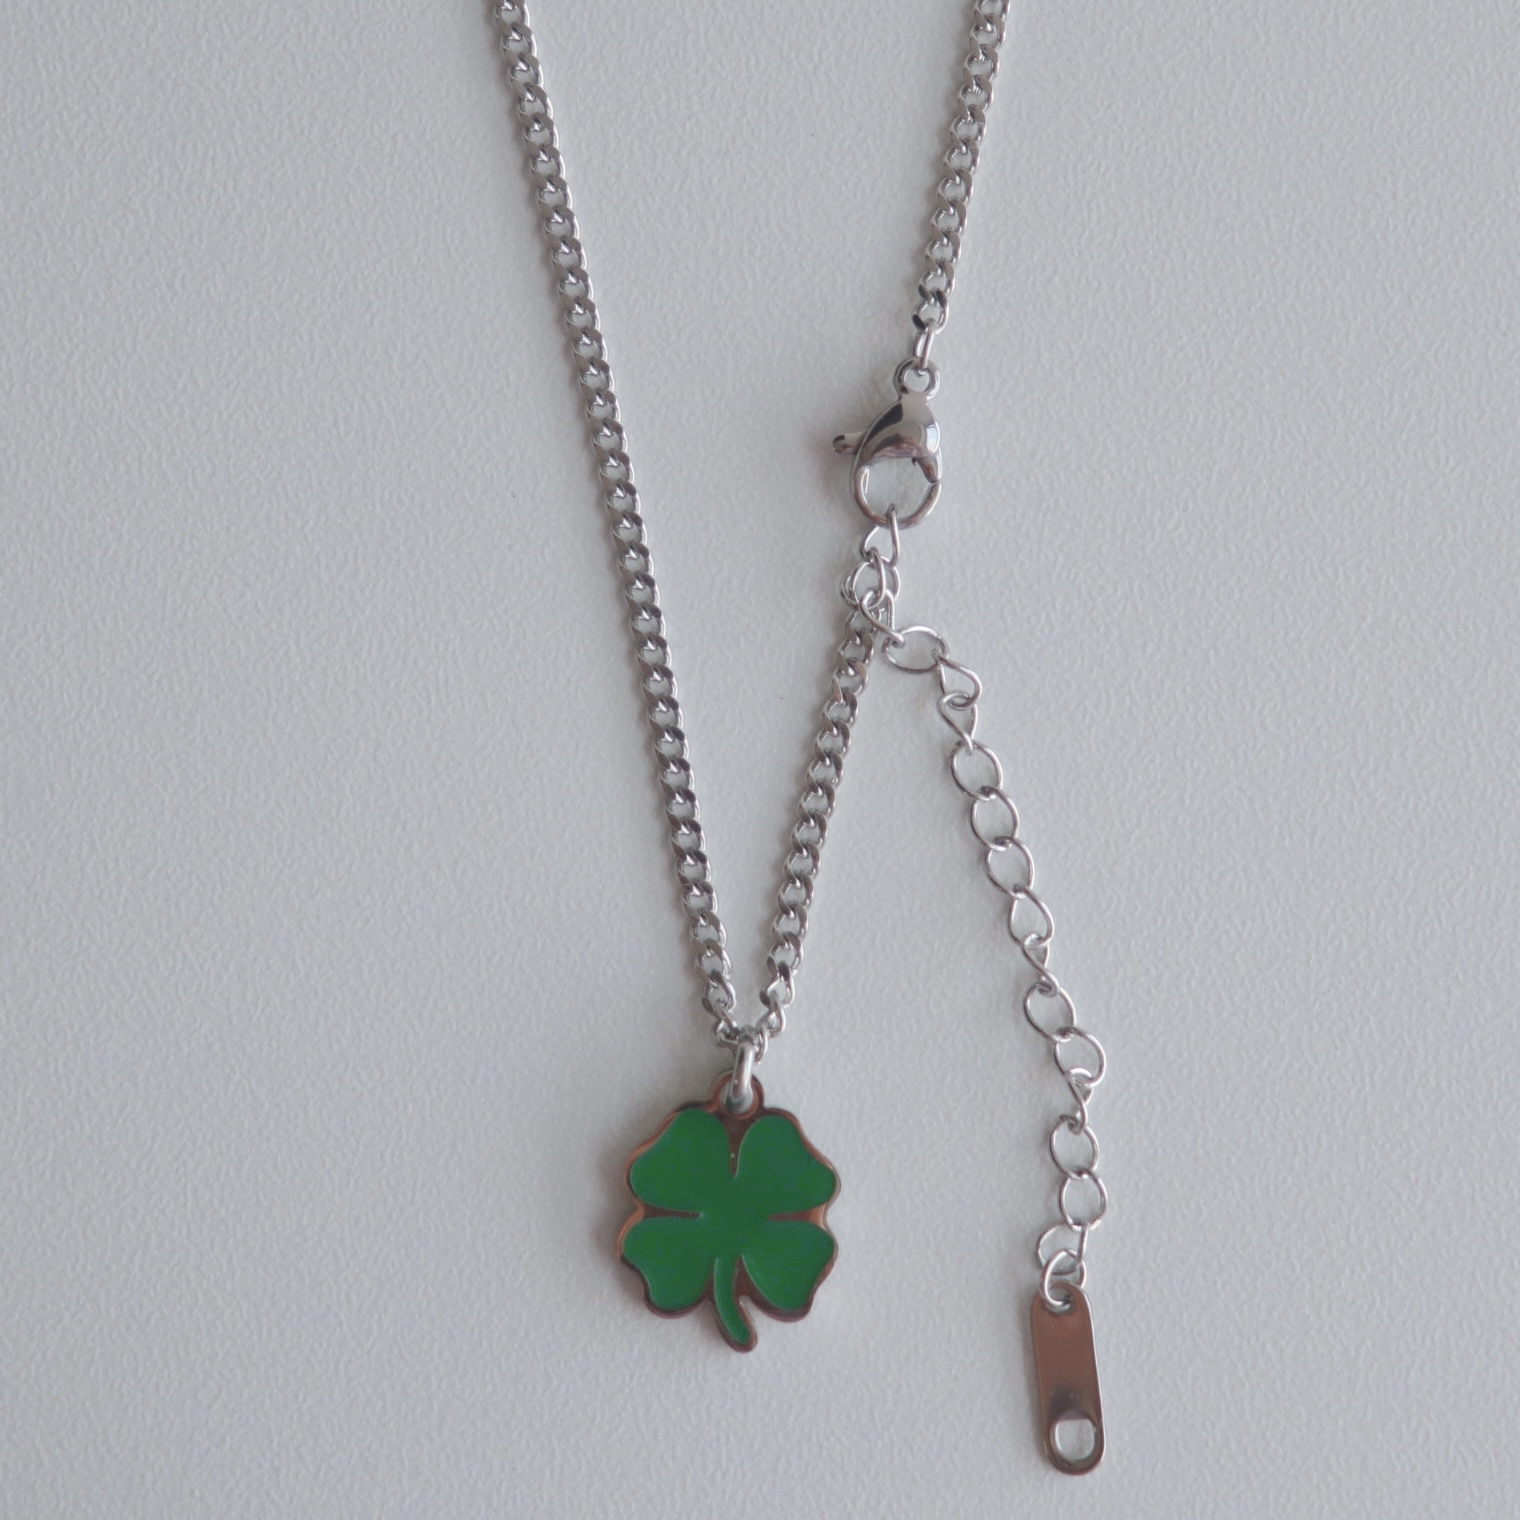 lucky charm necklace